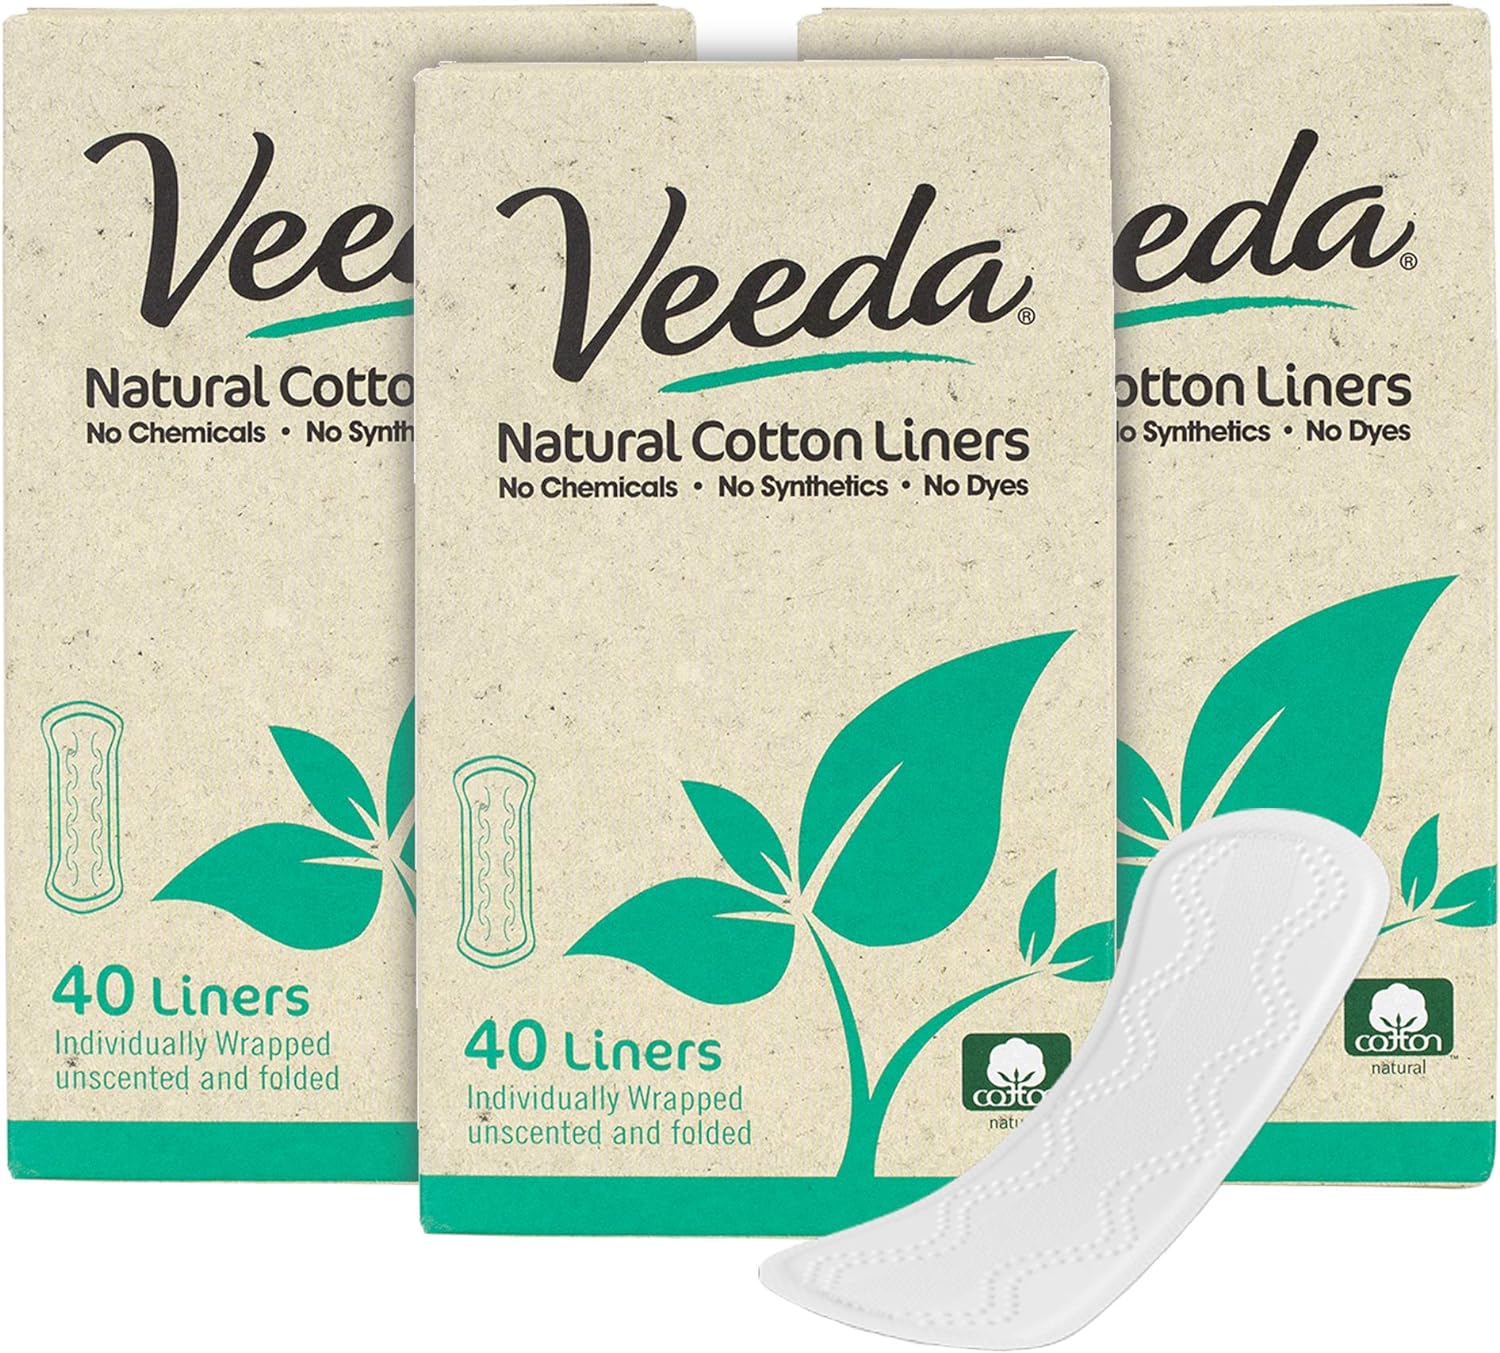 Veeda Ultra Thin Natural Cotton Breathable Daily Liners are Always Chlorine and Toxin Free, Hypoallergenic, 40 Count - Premium Panty Liners from Concordia Style Boutique - Just $14.94! Shop now at Concordia Style Boutique